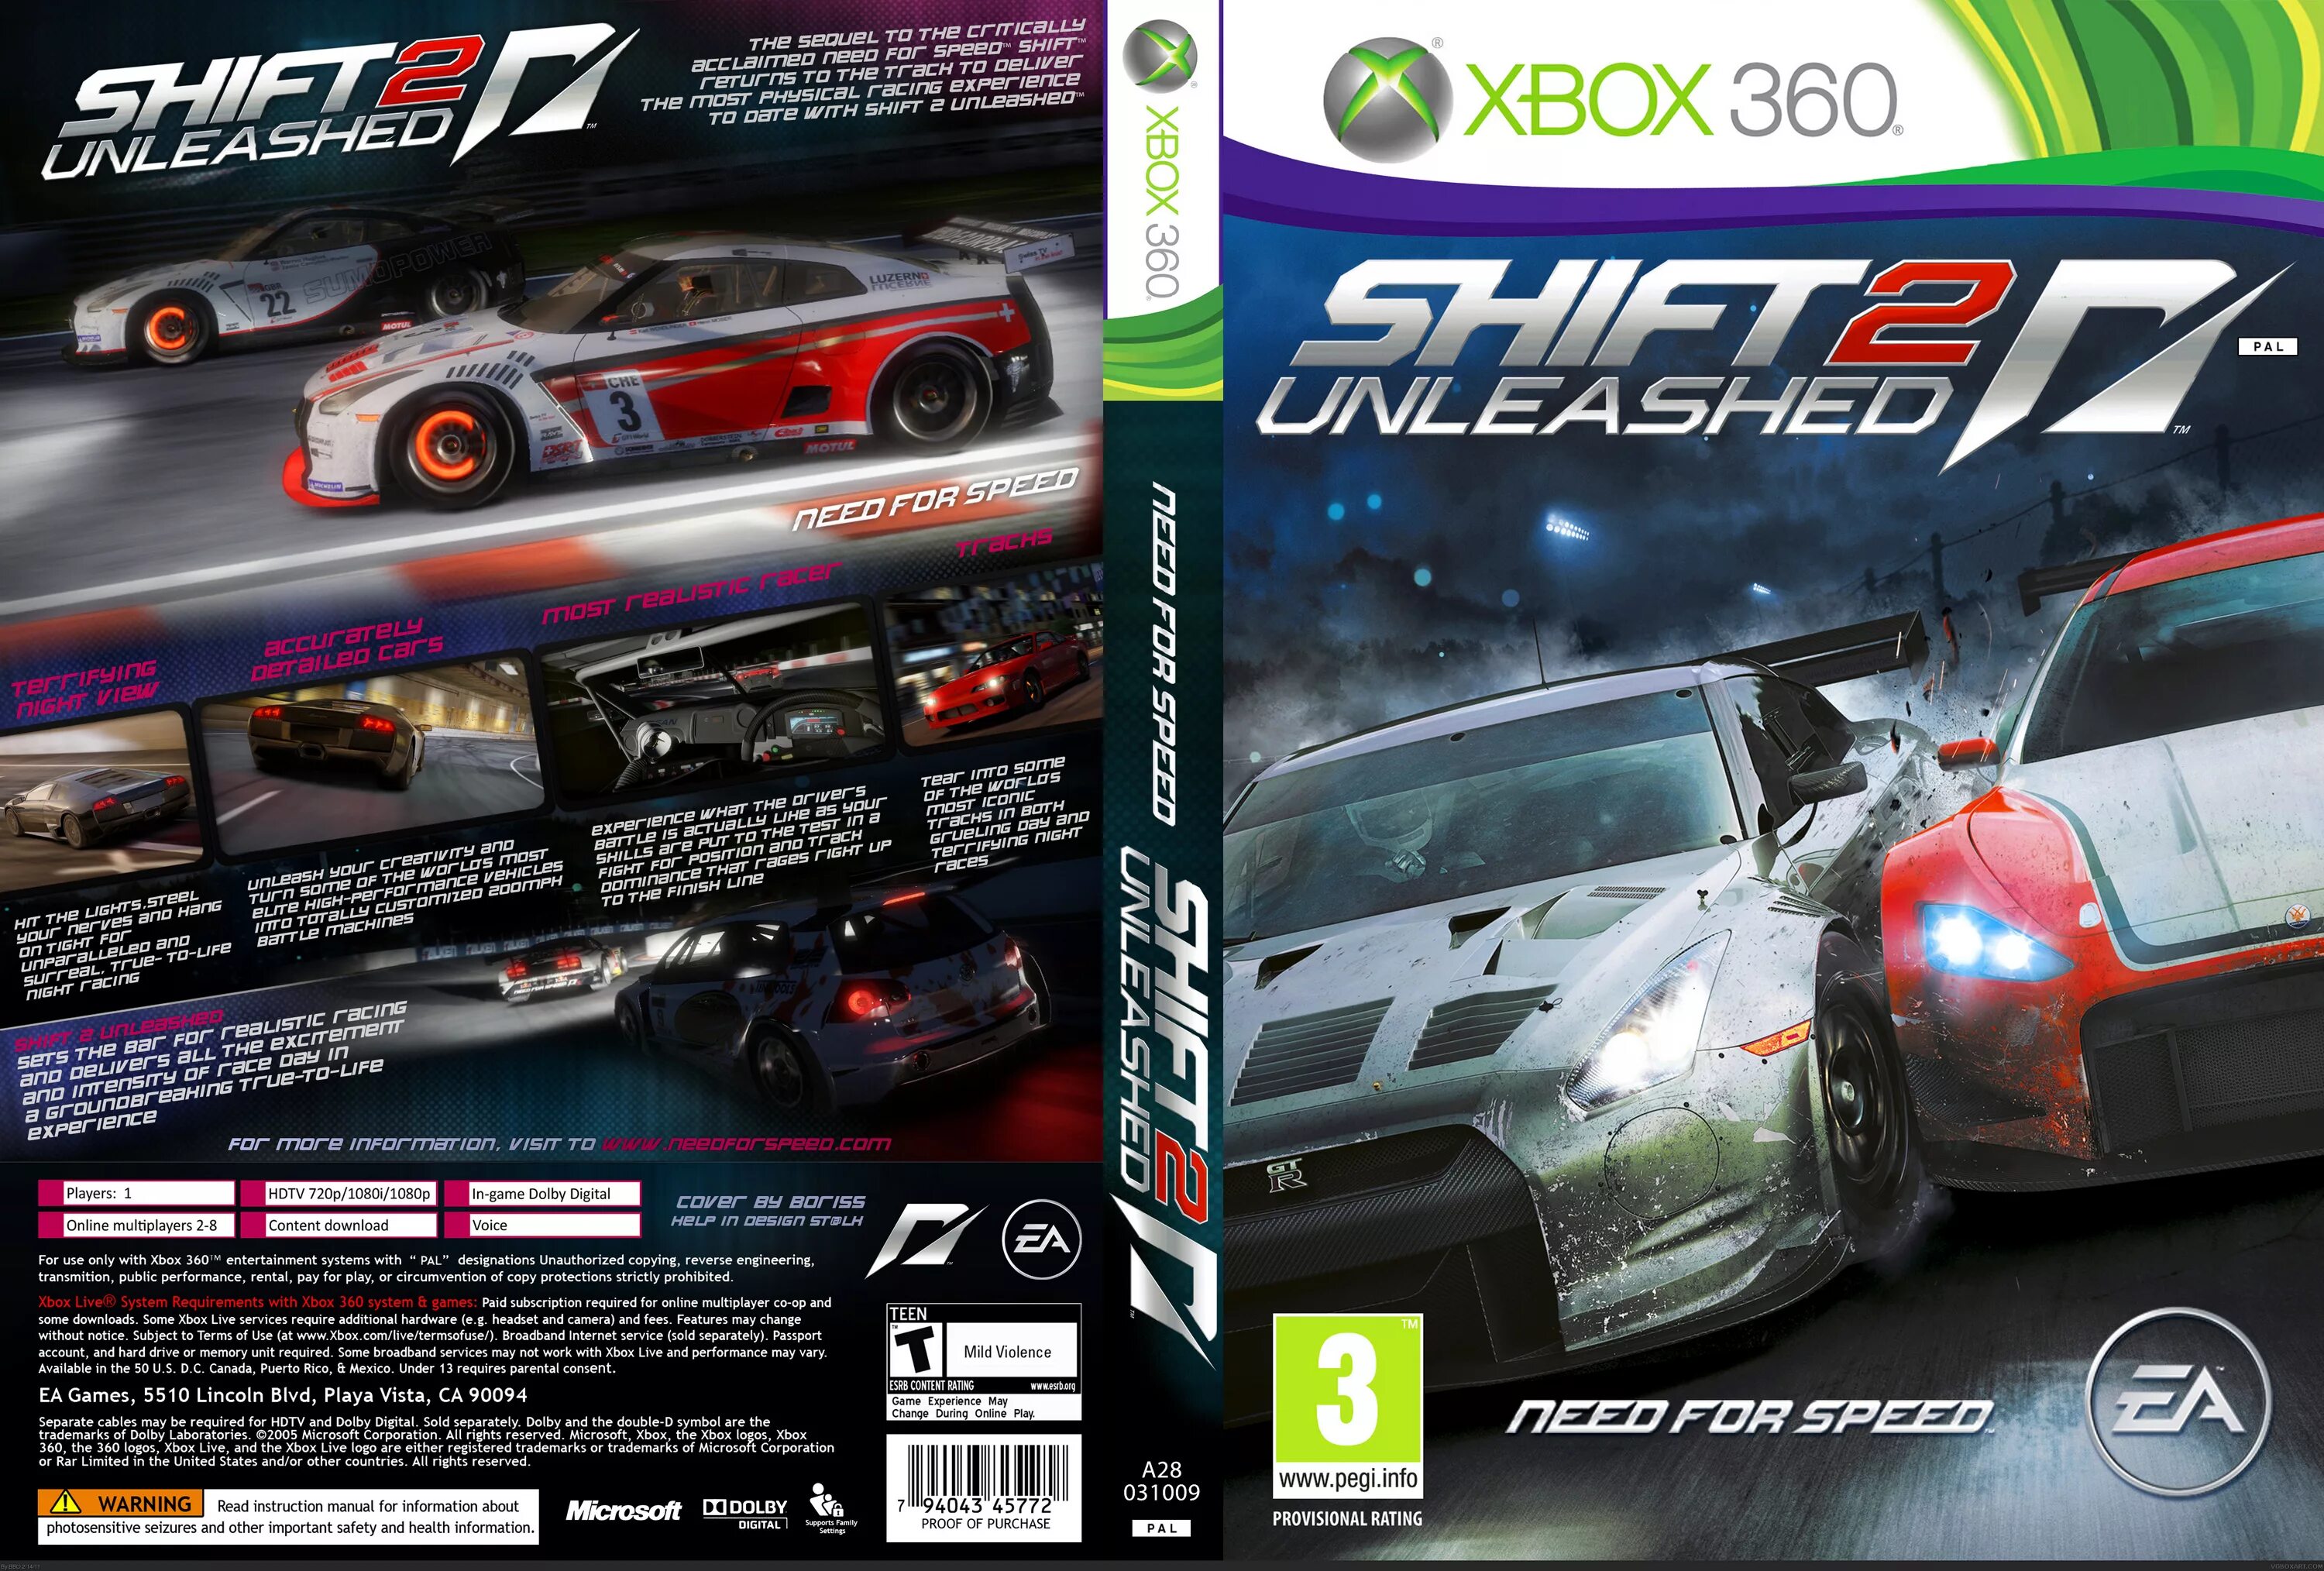 Xbox 360 игры 2024. Shift 2 unleashed Xbox 360. NFS Shift 2 unleashed Xbox 360. Need for Speed Shift 2 Xbox 360. Need for Speed Xbox 360 диск.